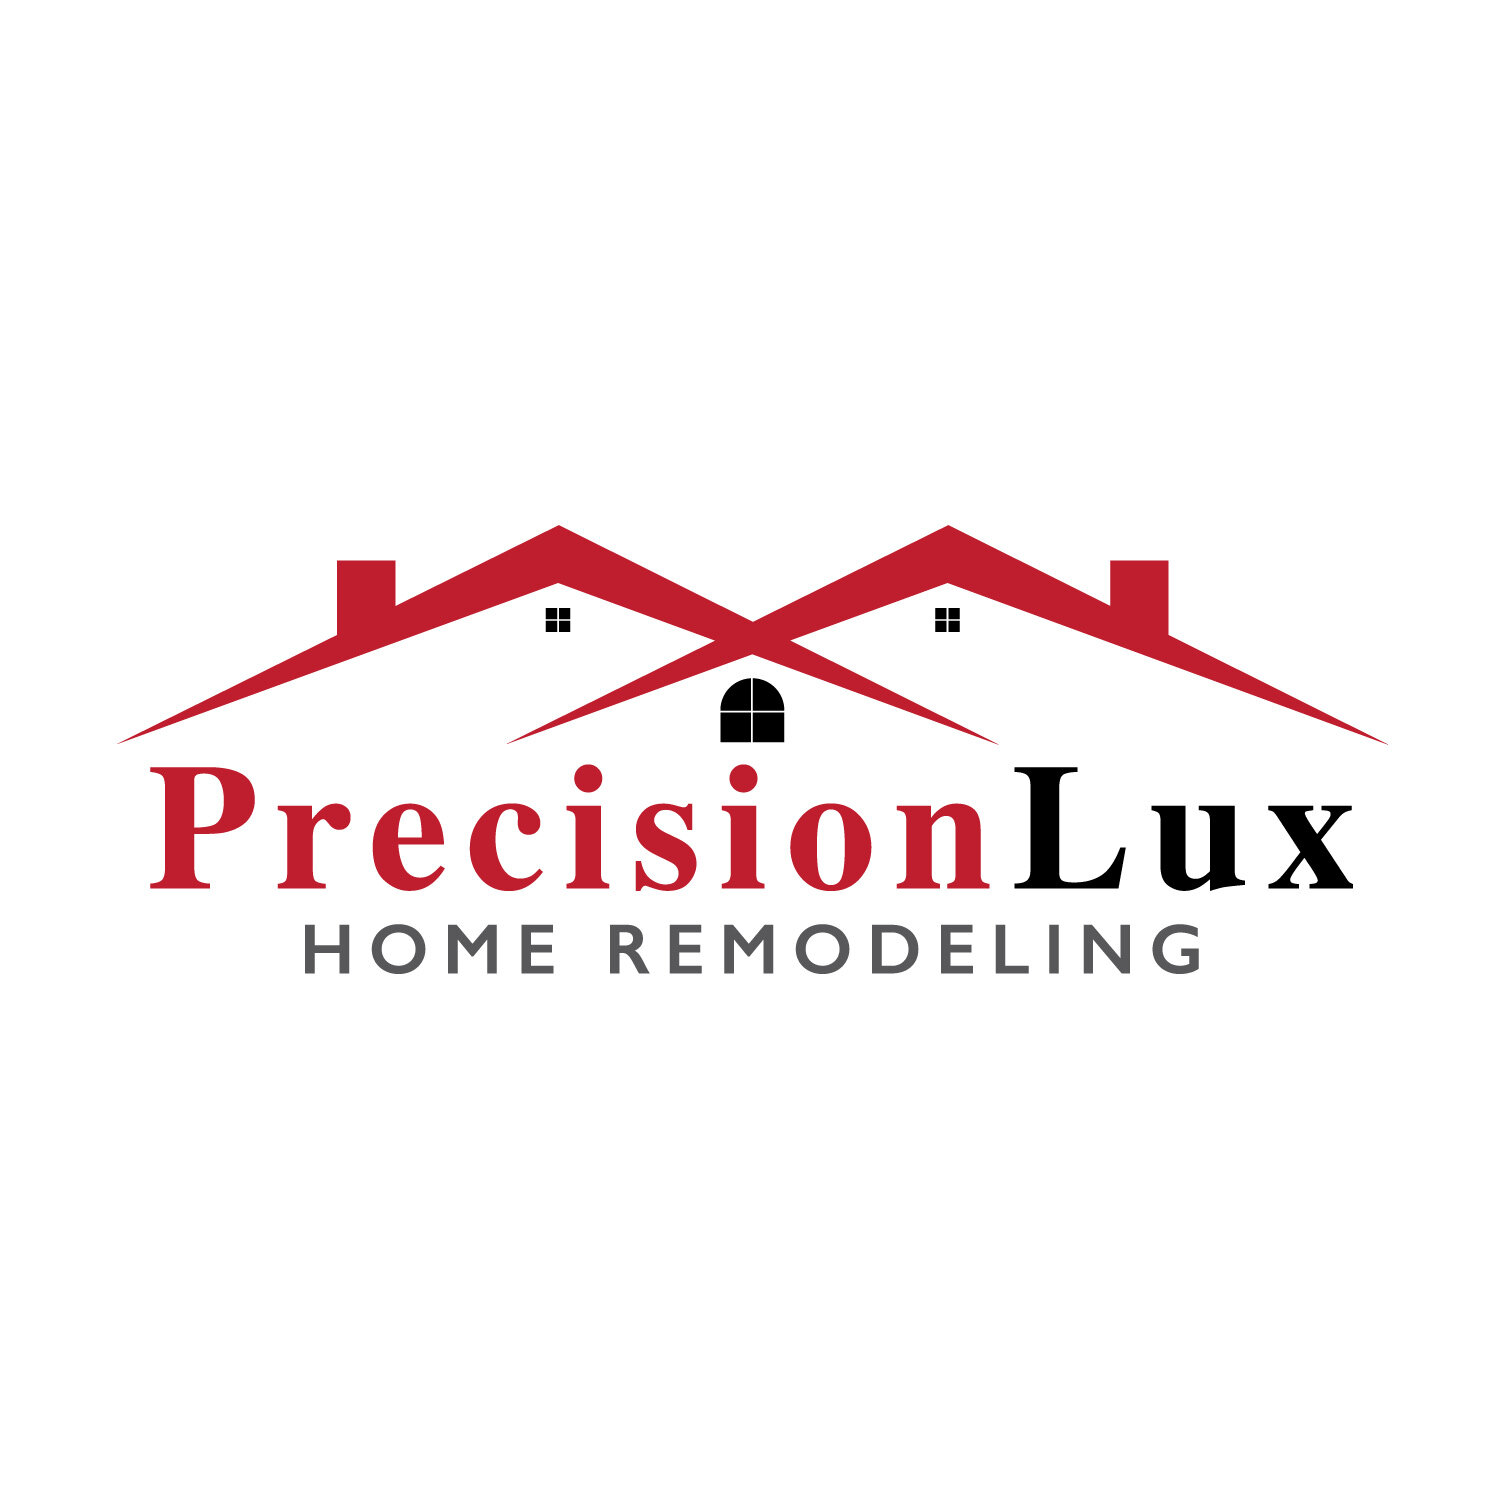 Precision Lux Home Remodeling